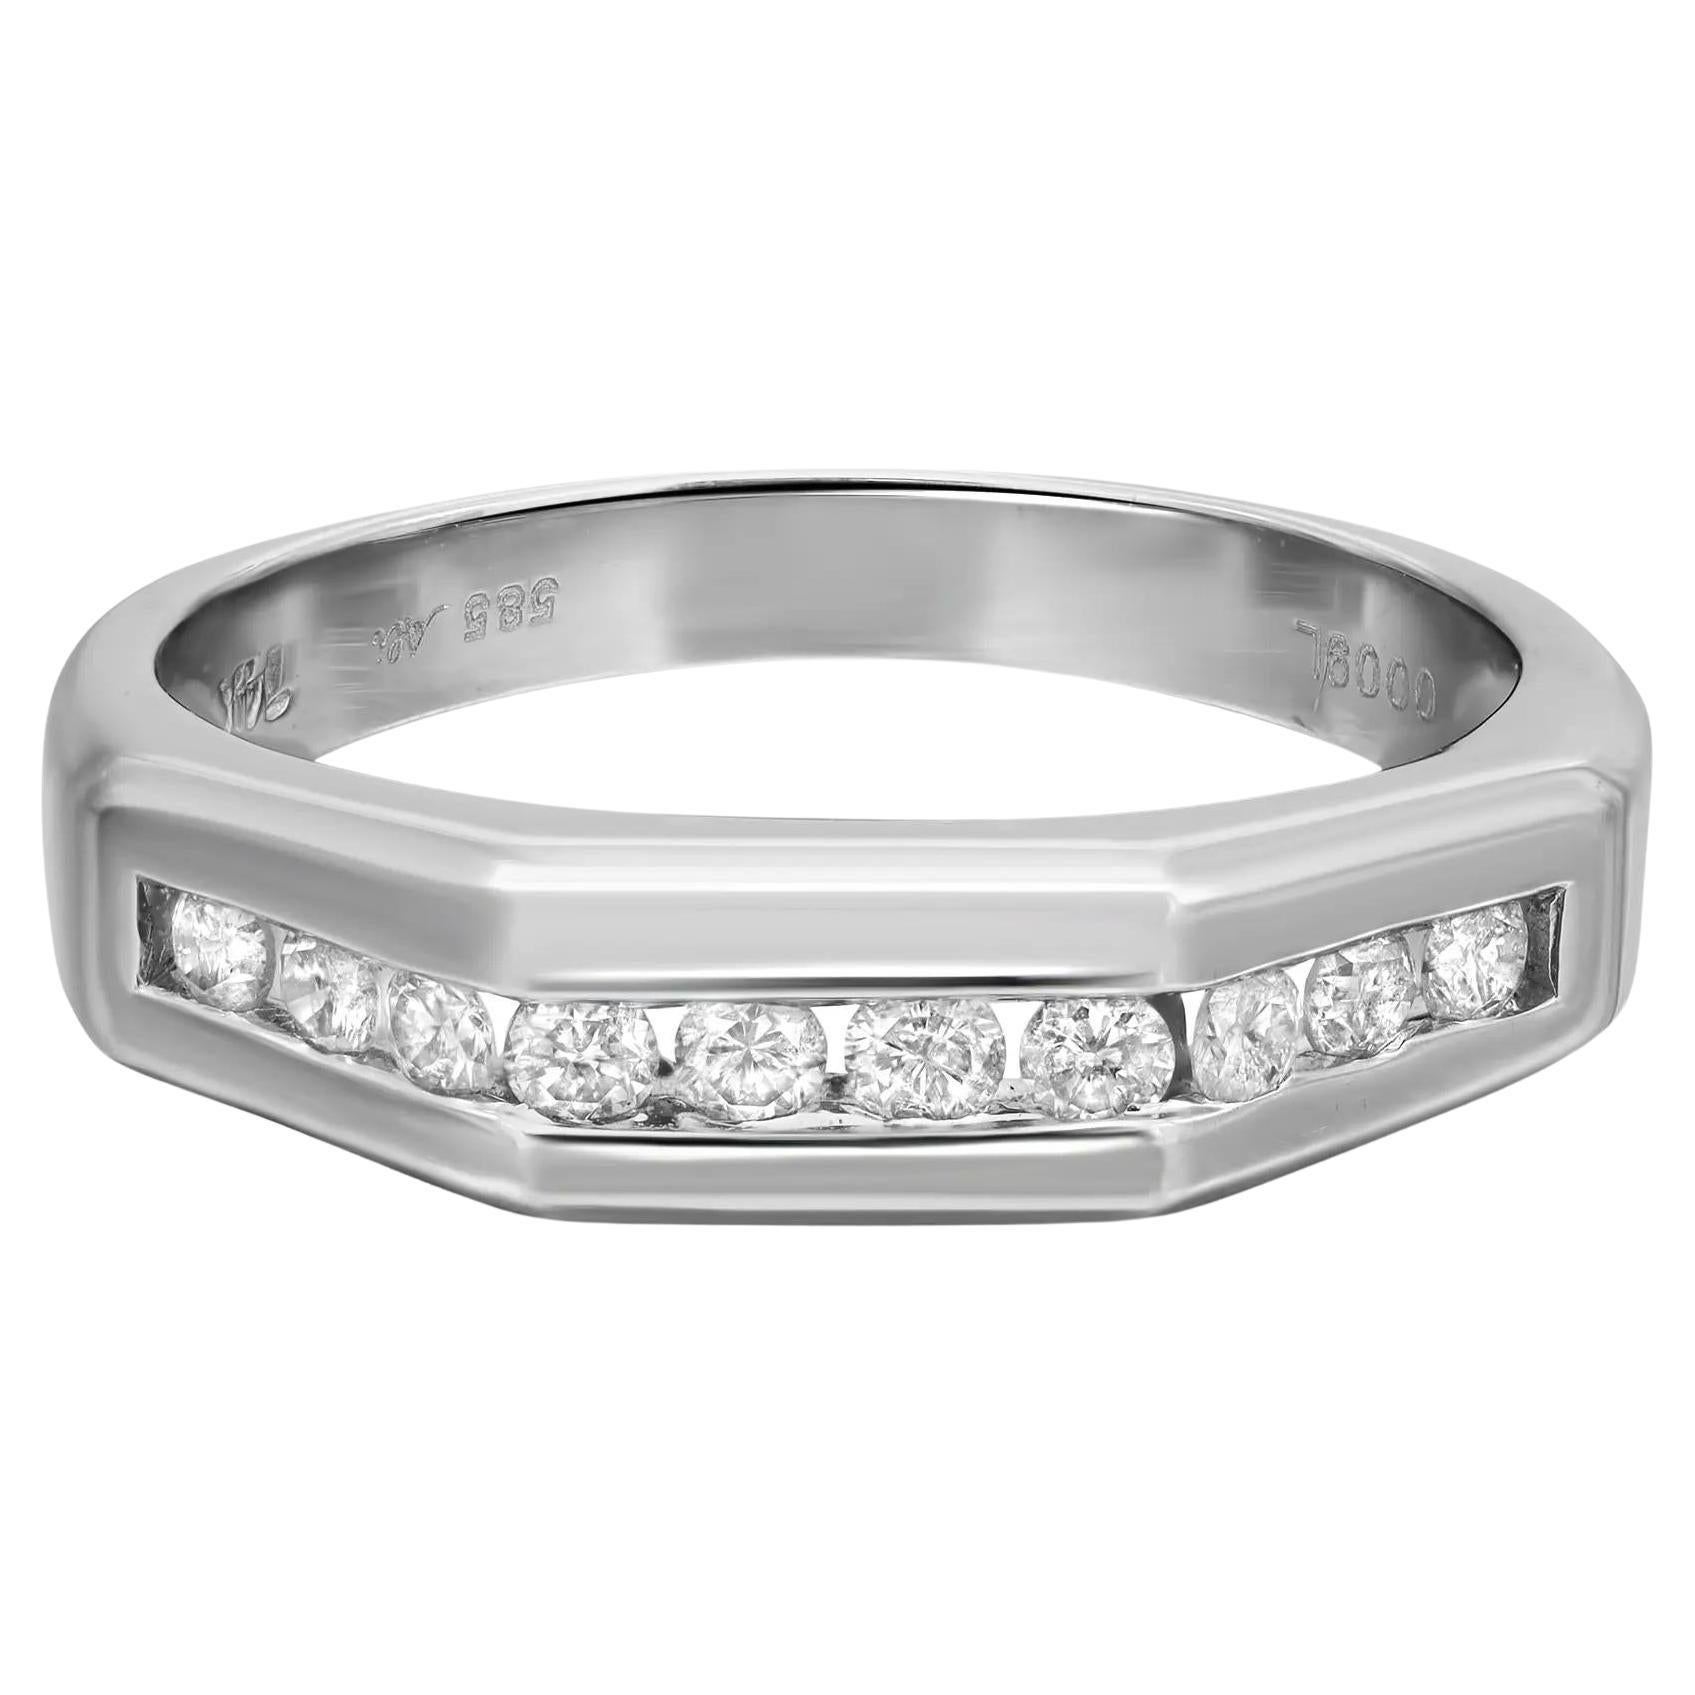 0.31Cttw Channel Set Round Diamond Wedding Band Ring 14K White Gold Size 7.5 For Sale